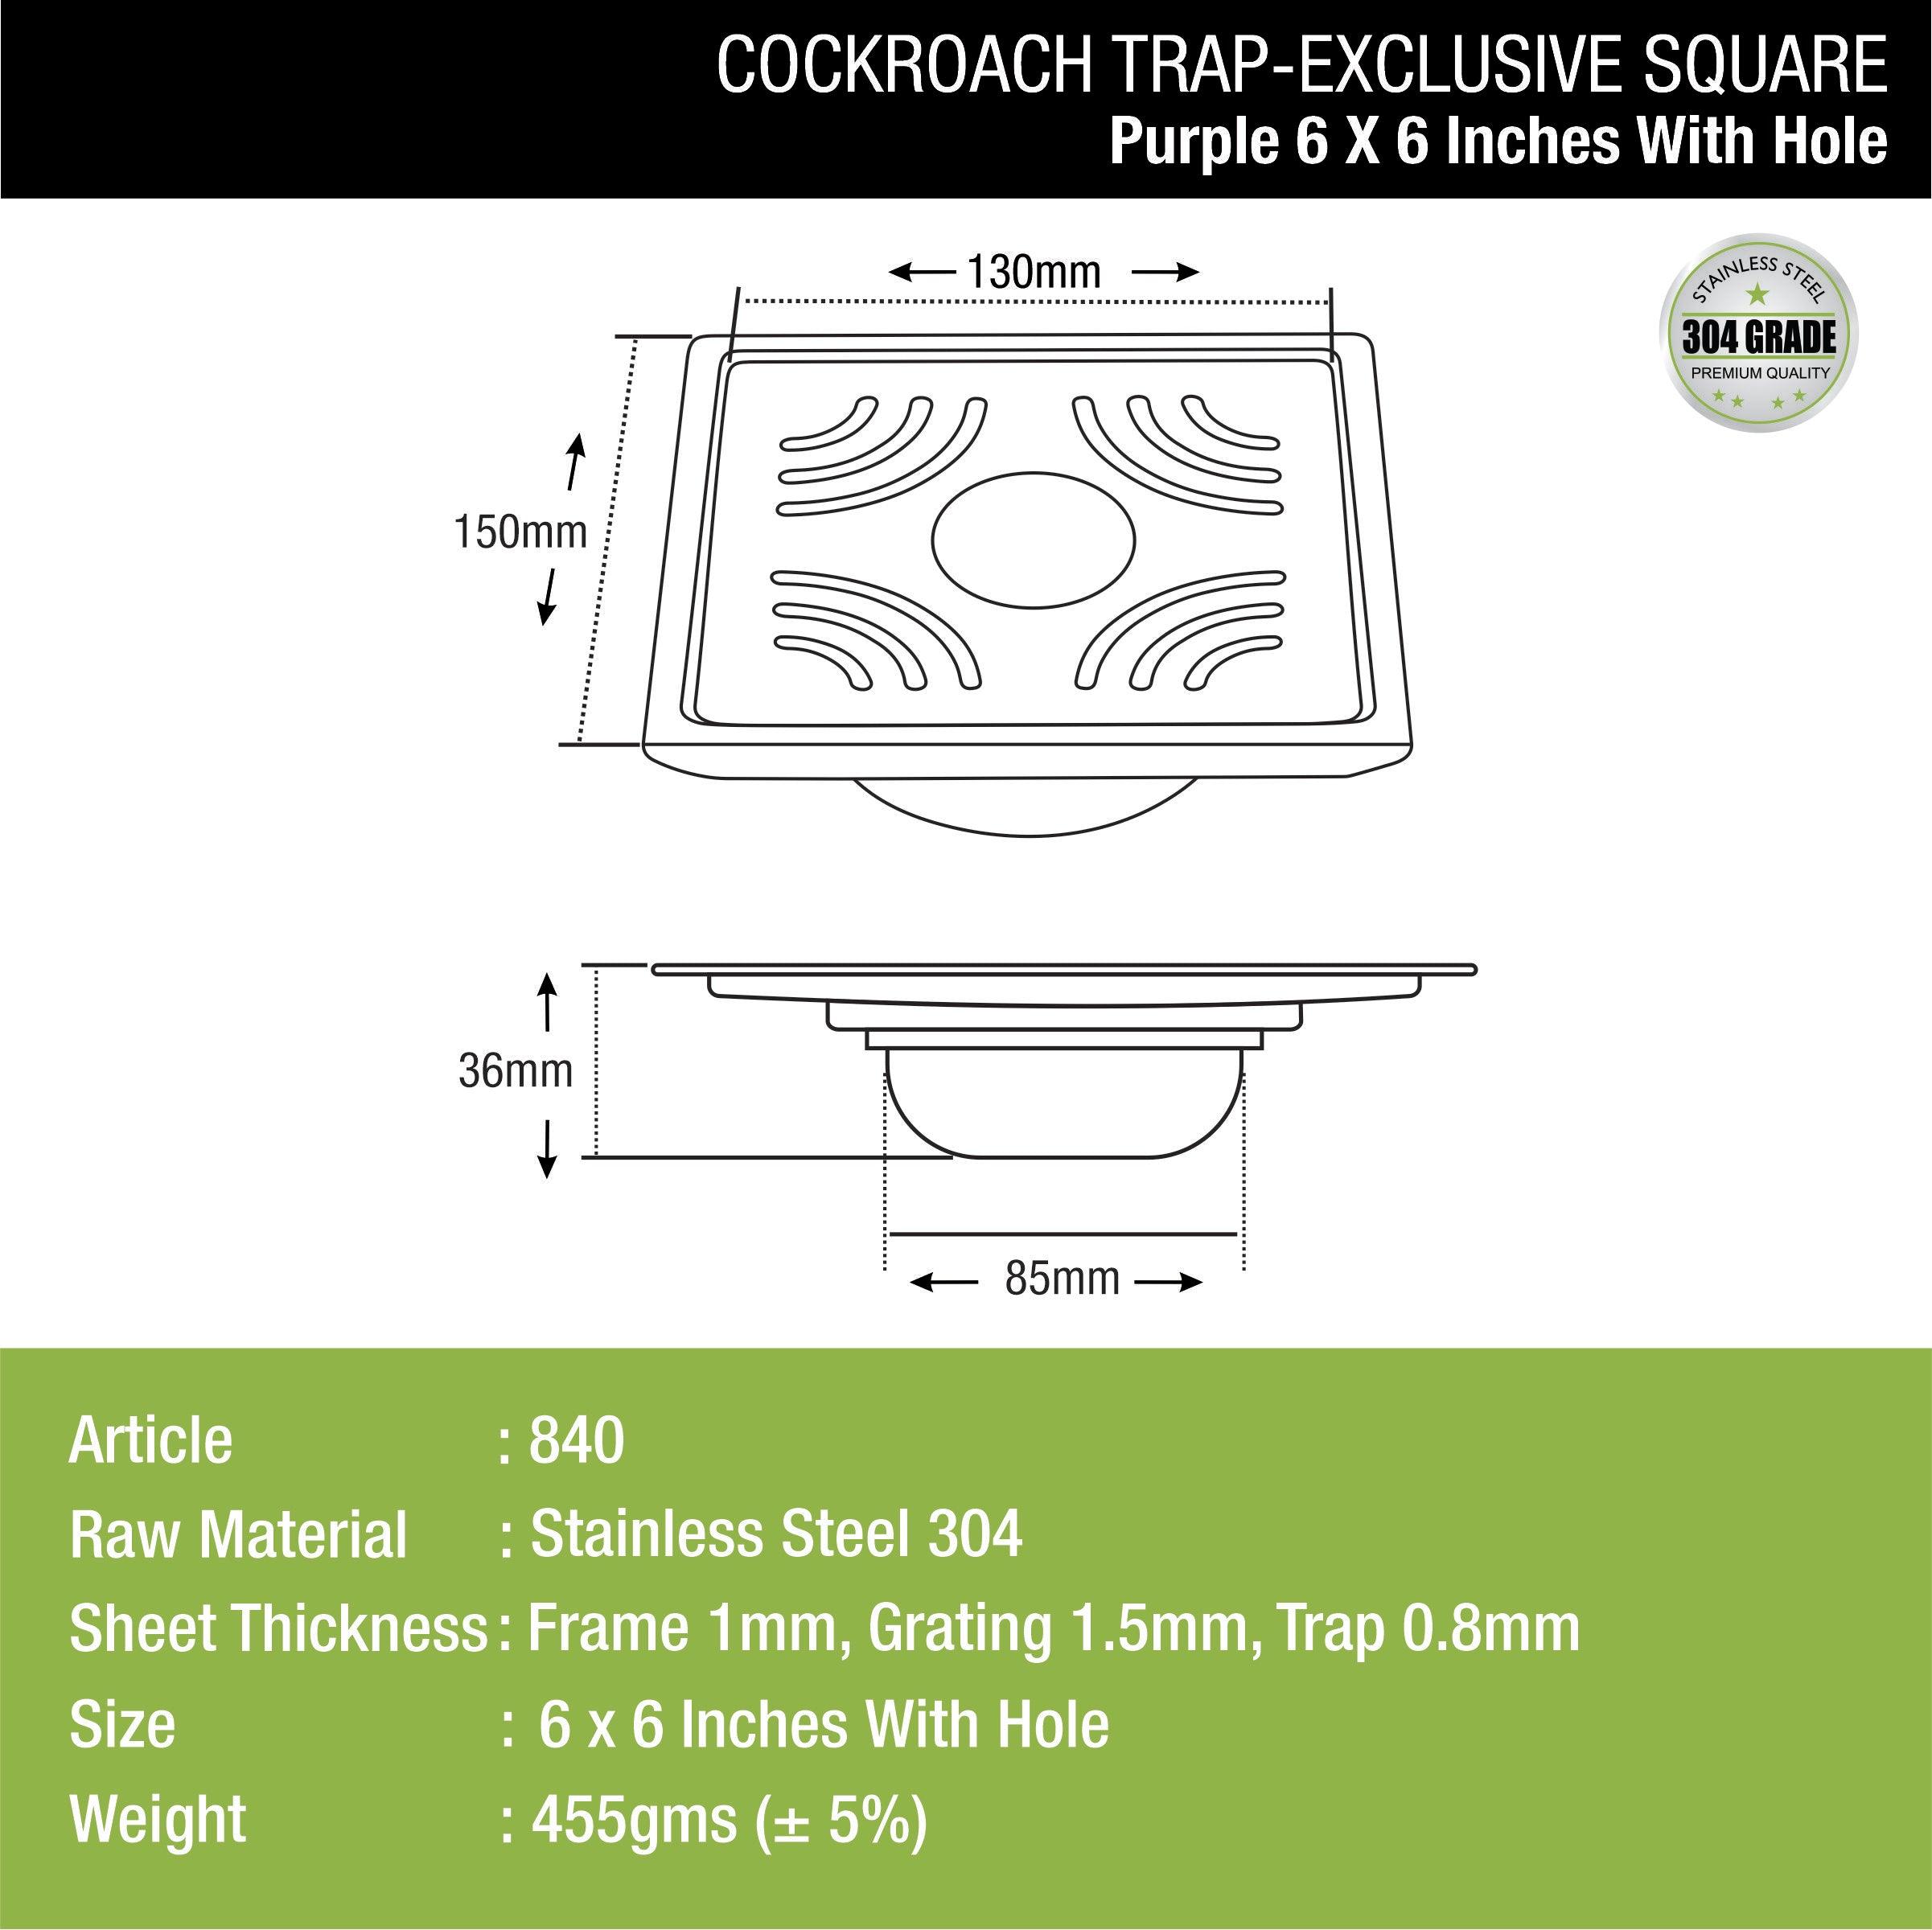 Purple Exclusive Square Floor Drain (6 x 6 Inches) with Hole & Cockroach Trap dimensions and sizes